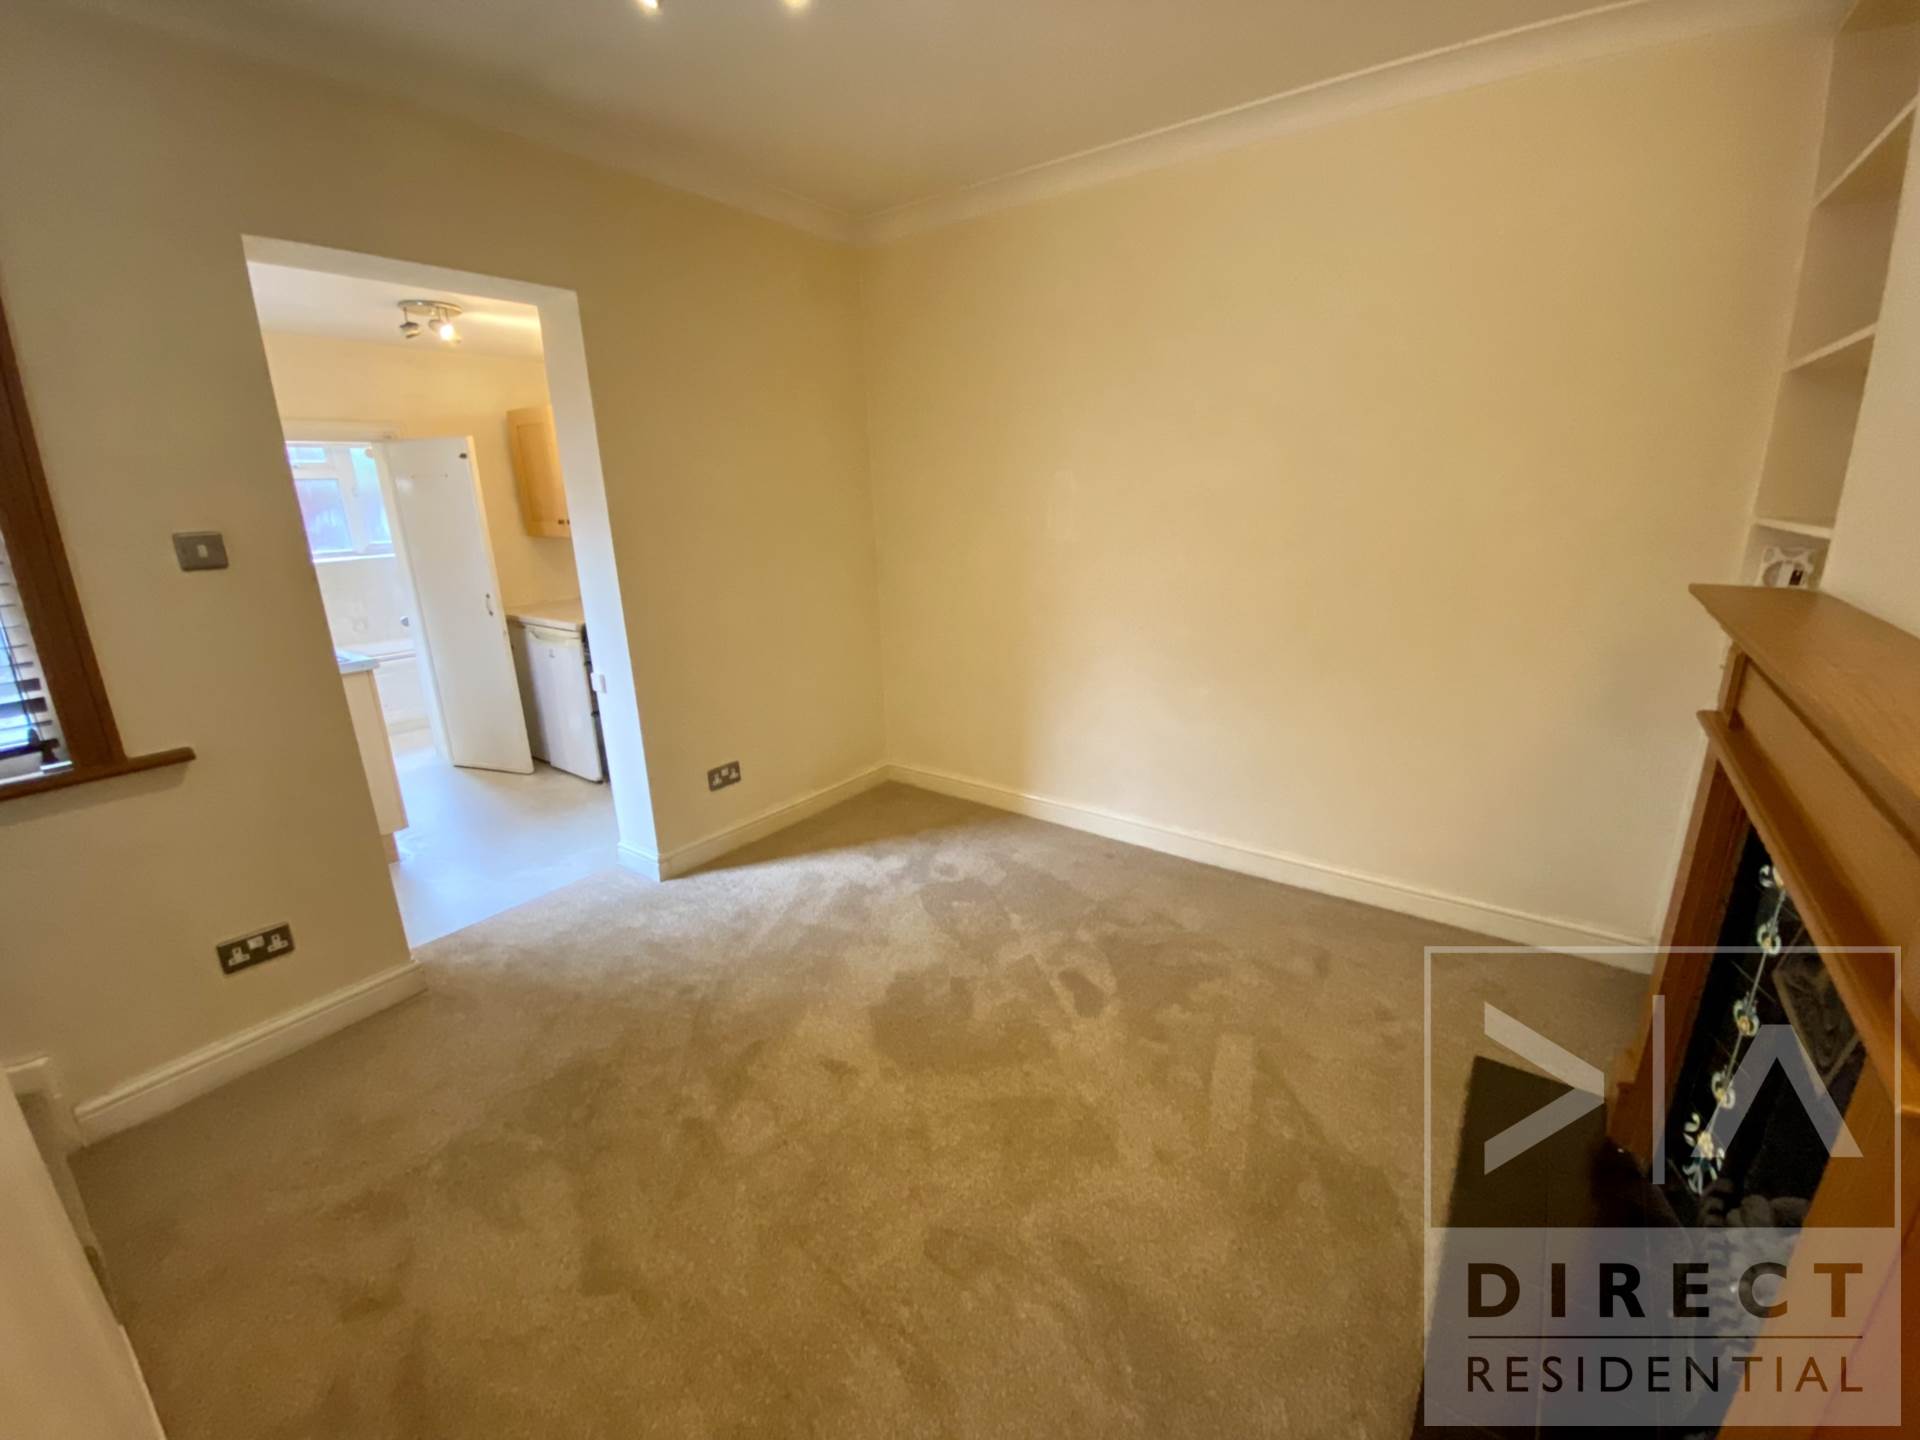 Beaconsfield Place, Epsom, KT17 4BD, Image 6